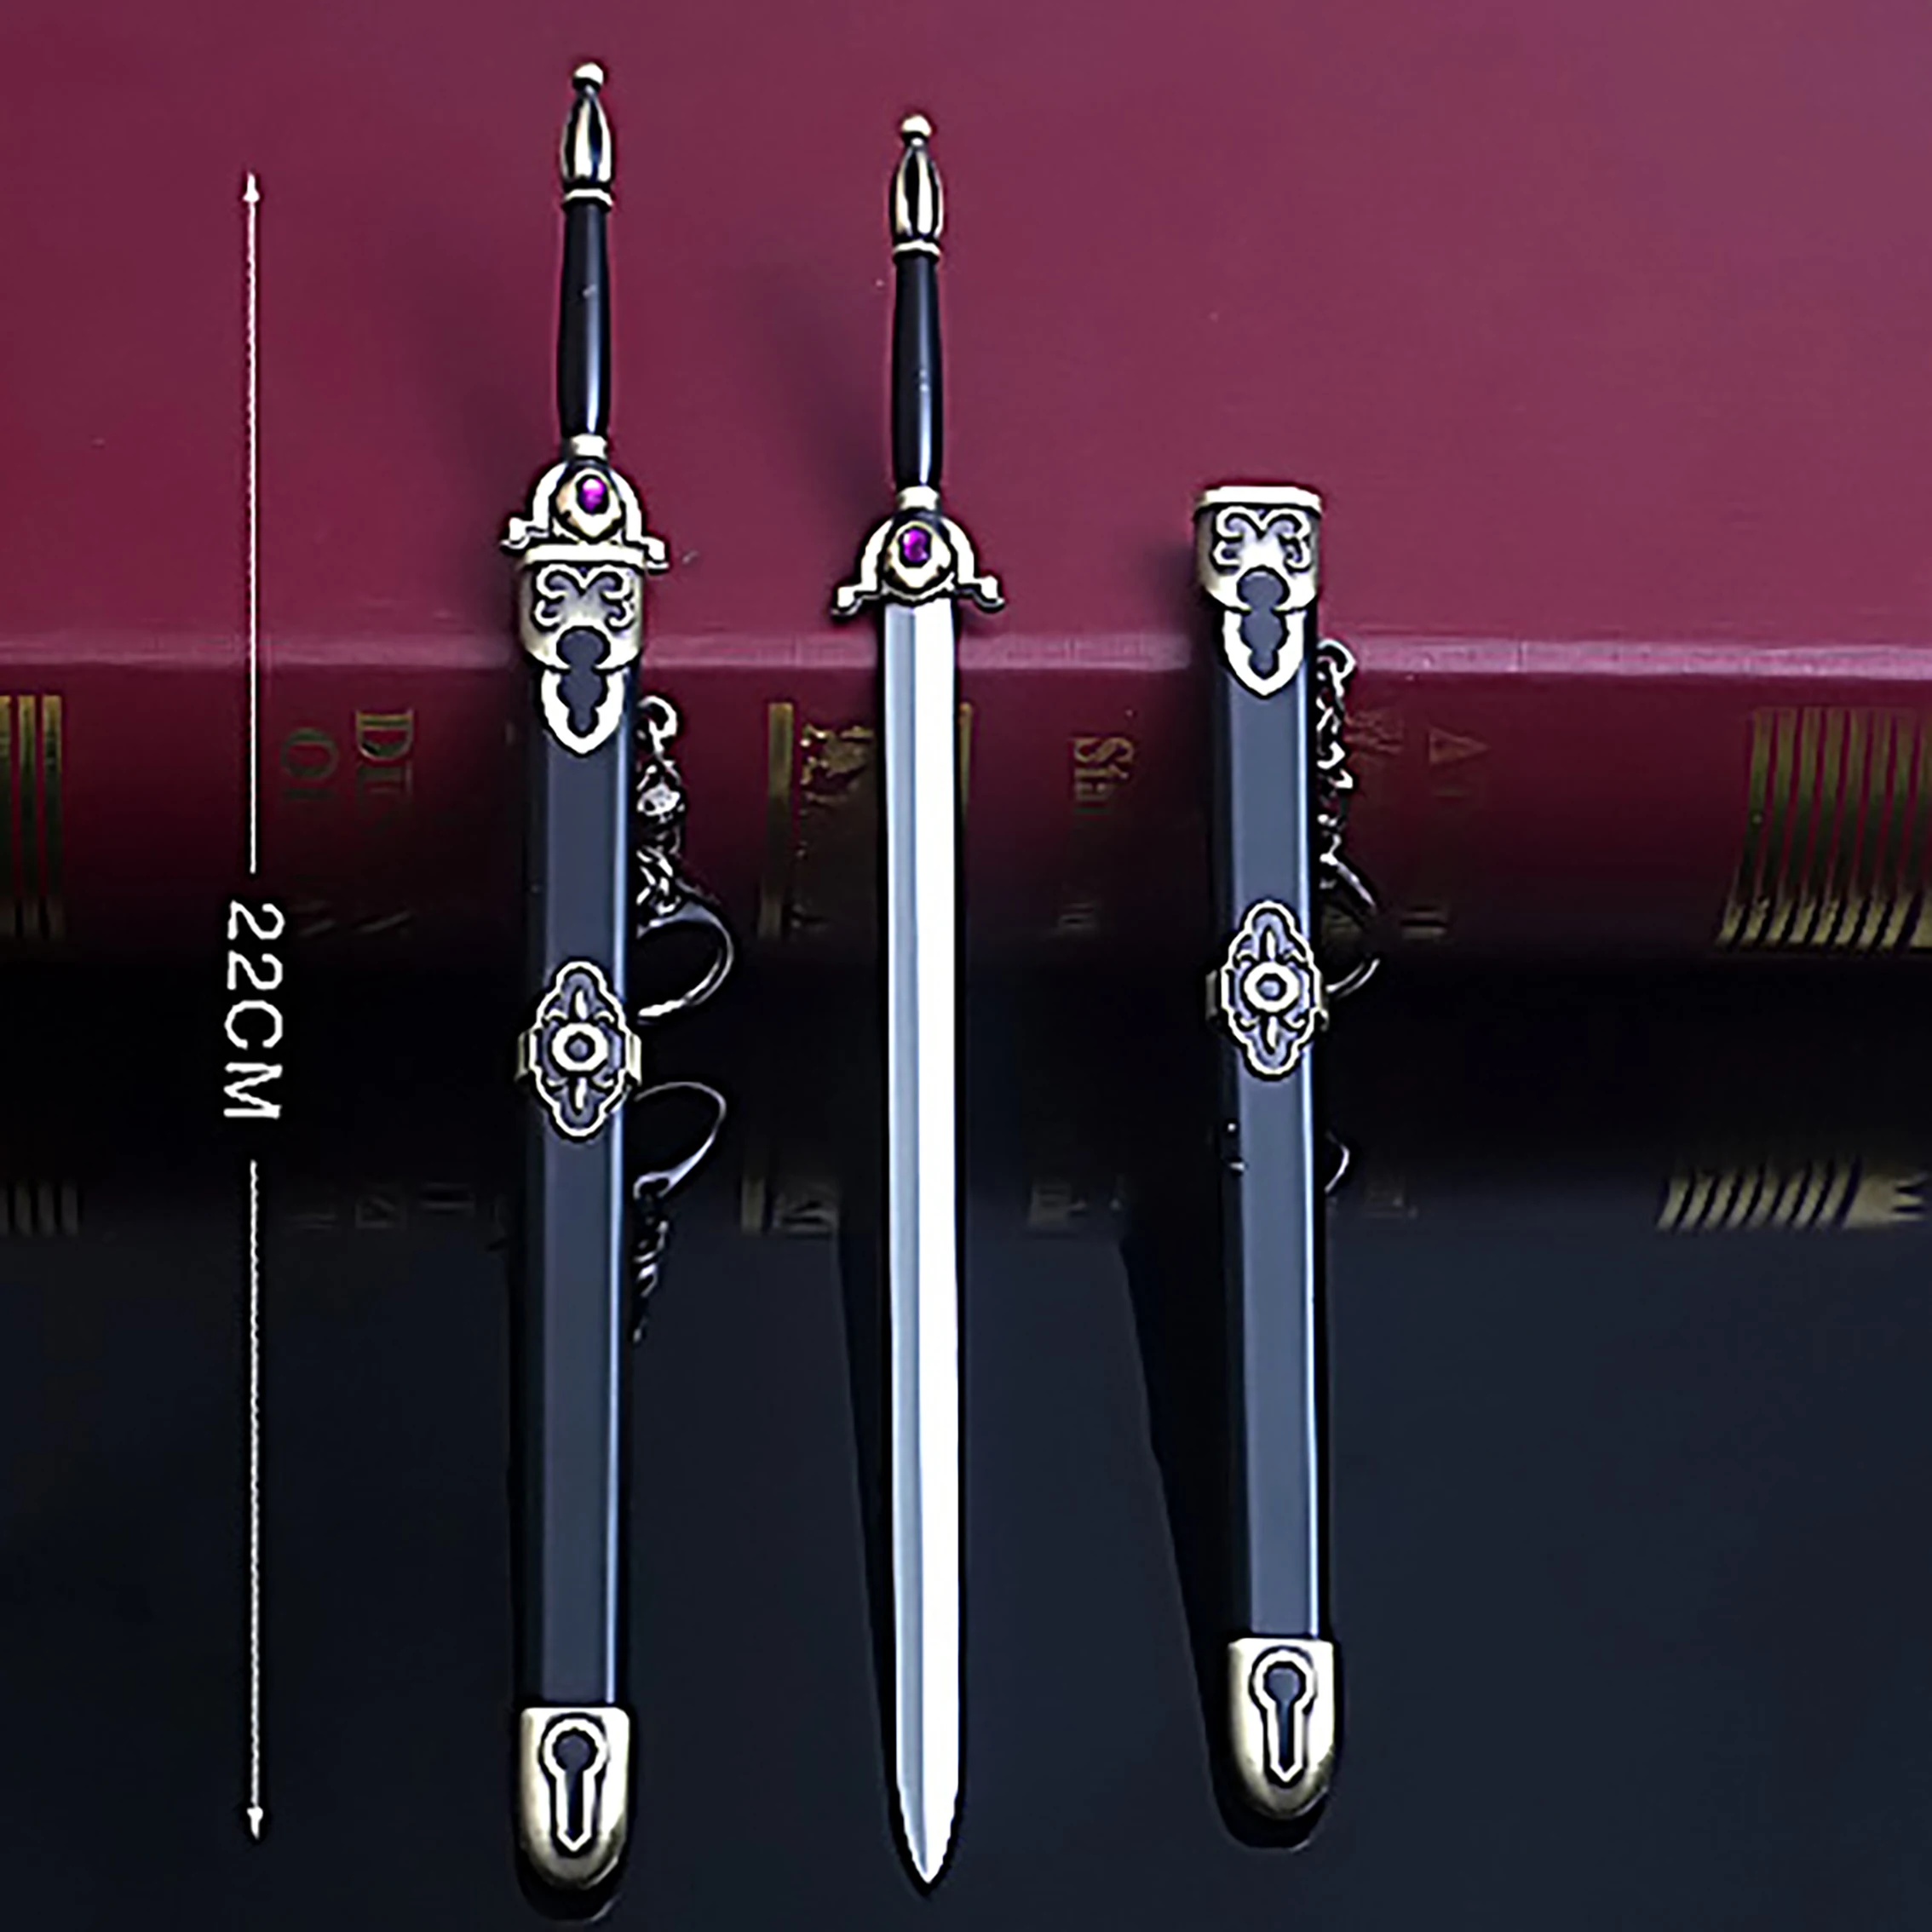 Fate Night Surrounding Fate Lanling King Sword Alloy Model 22cm Sword Ornaments Metal Die Casting Mini Toy Ornaments Collection images - 6